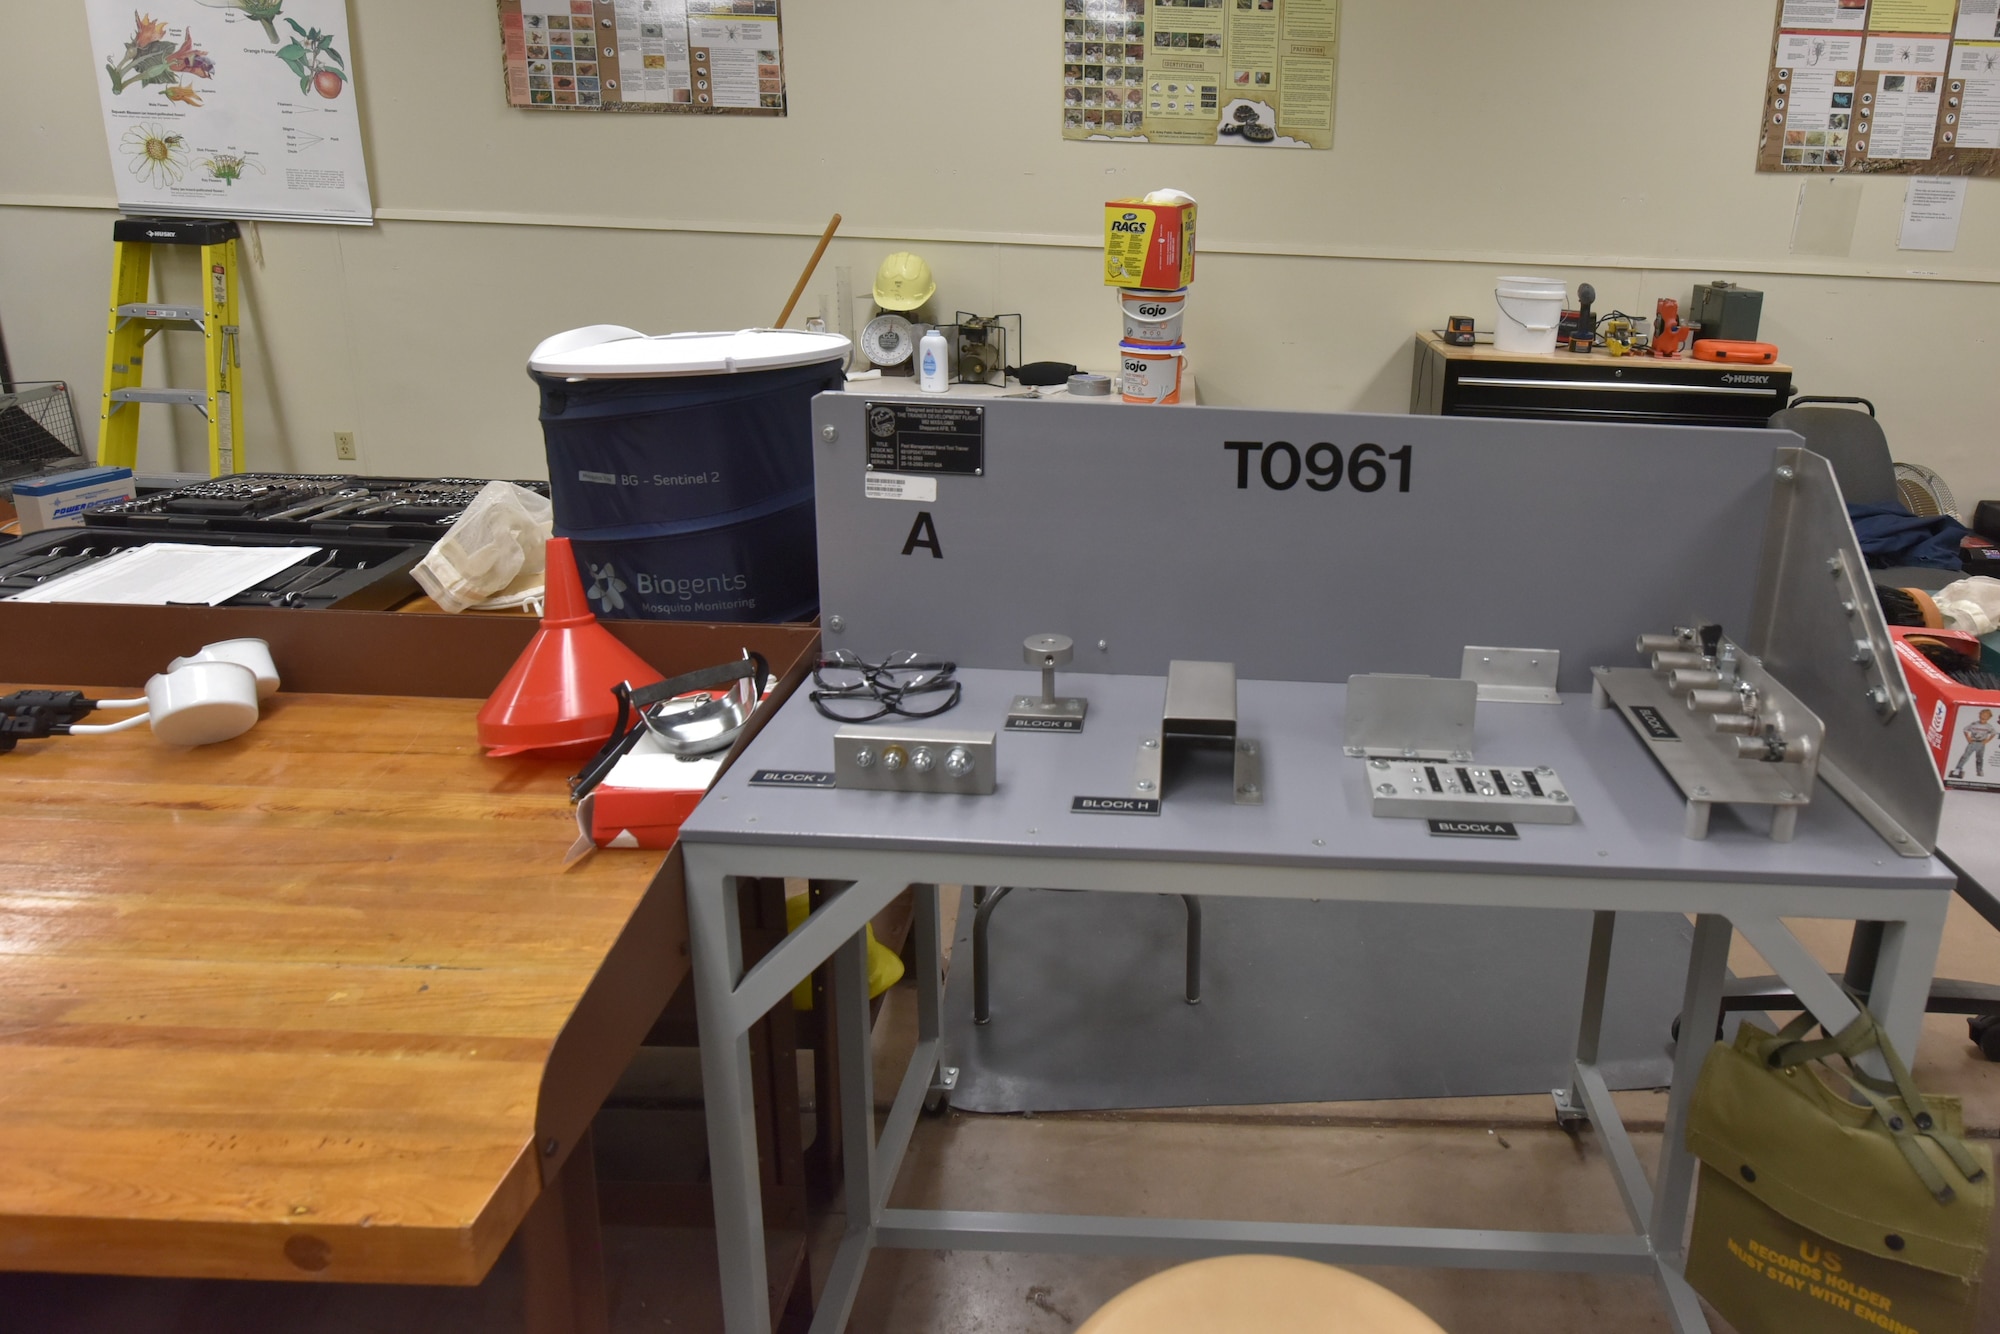 A gray table with nuts and bolts attached used to train students to use tools